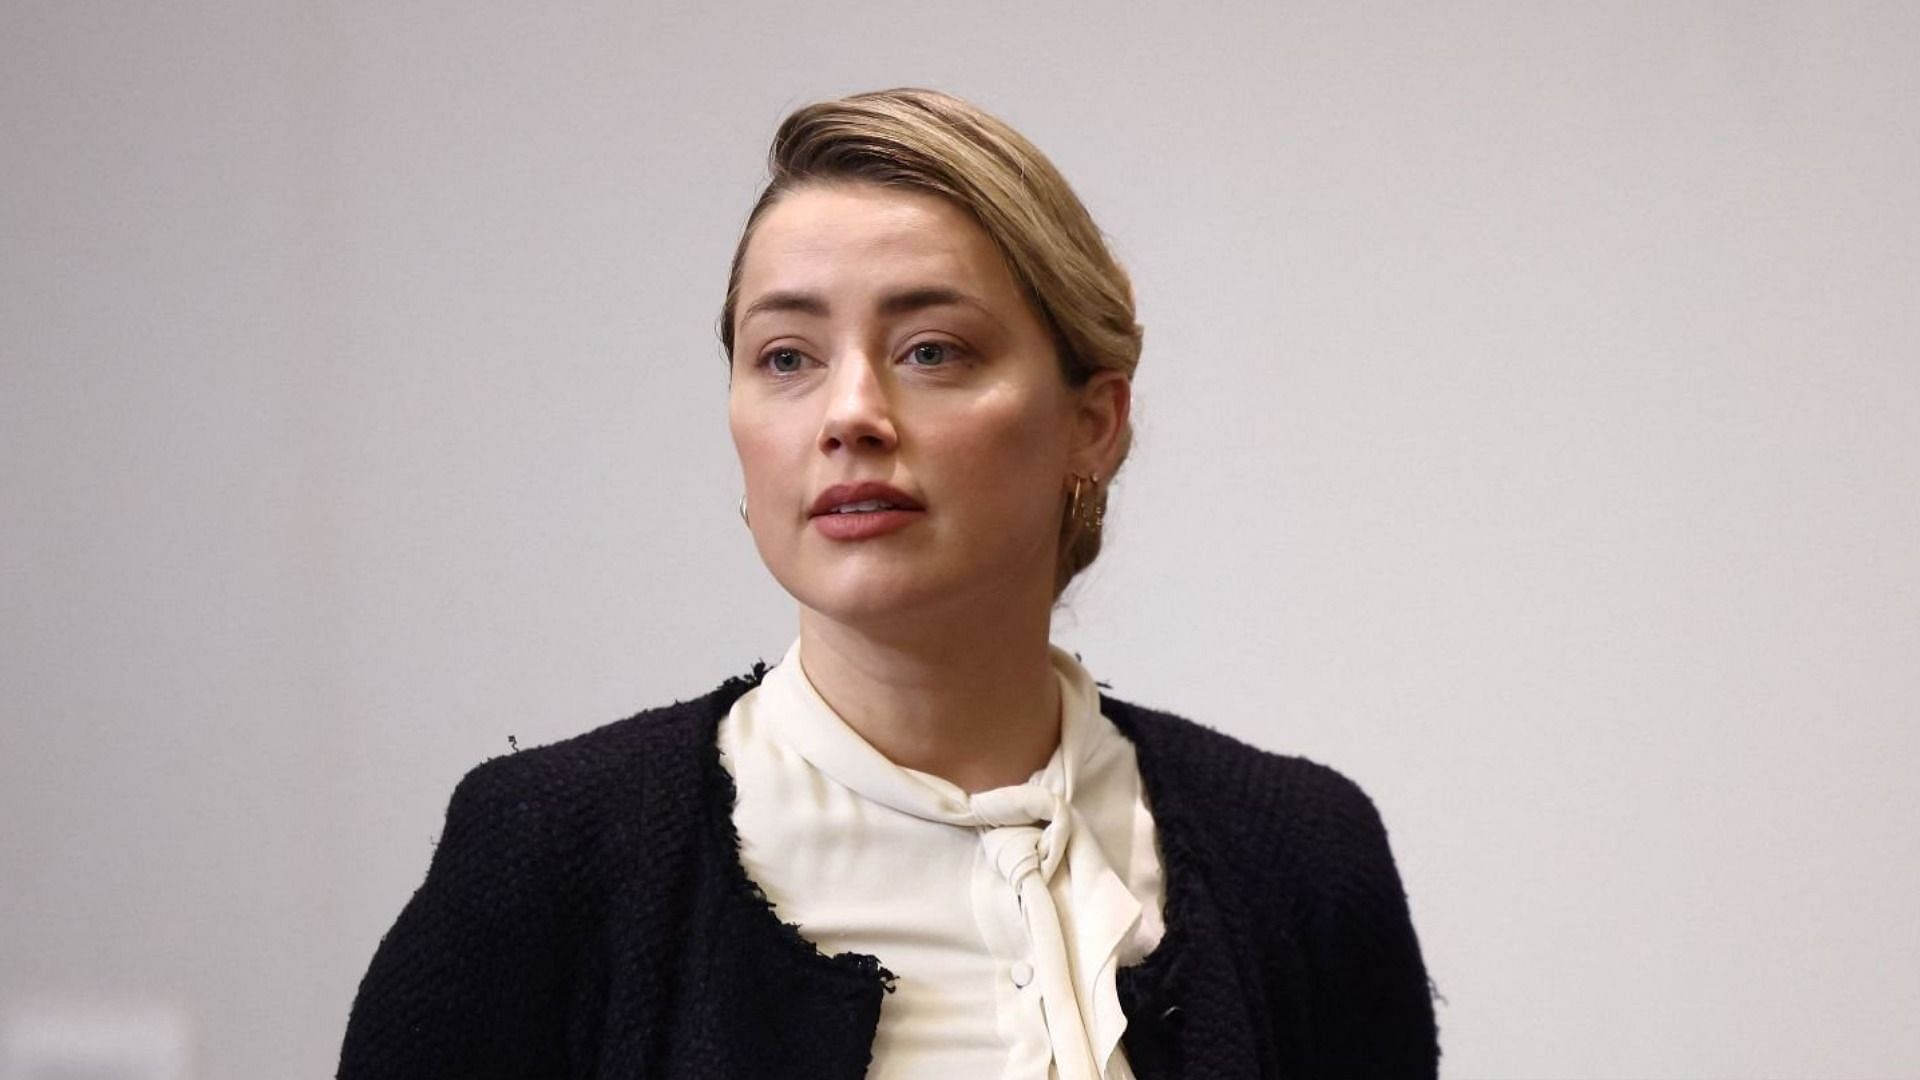 Amber Heard was questioned in court about her donation from the $7 million divorce settlement (Image via Jim Lo Scalzo)